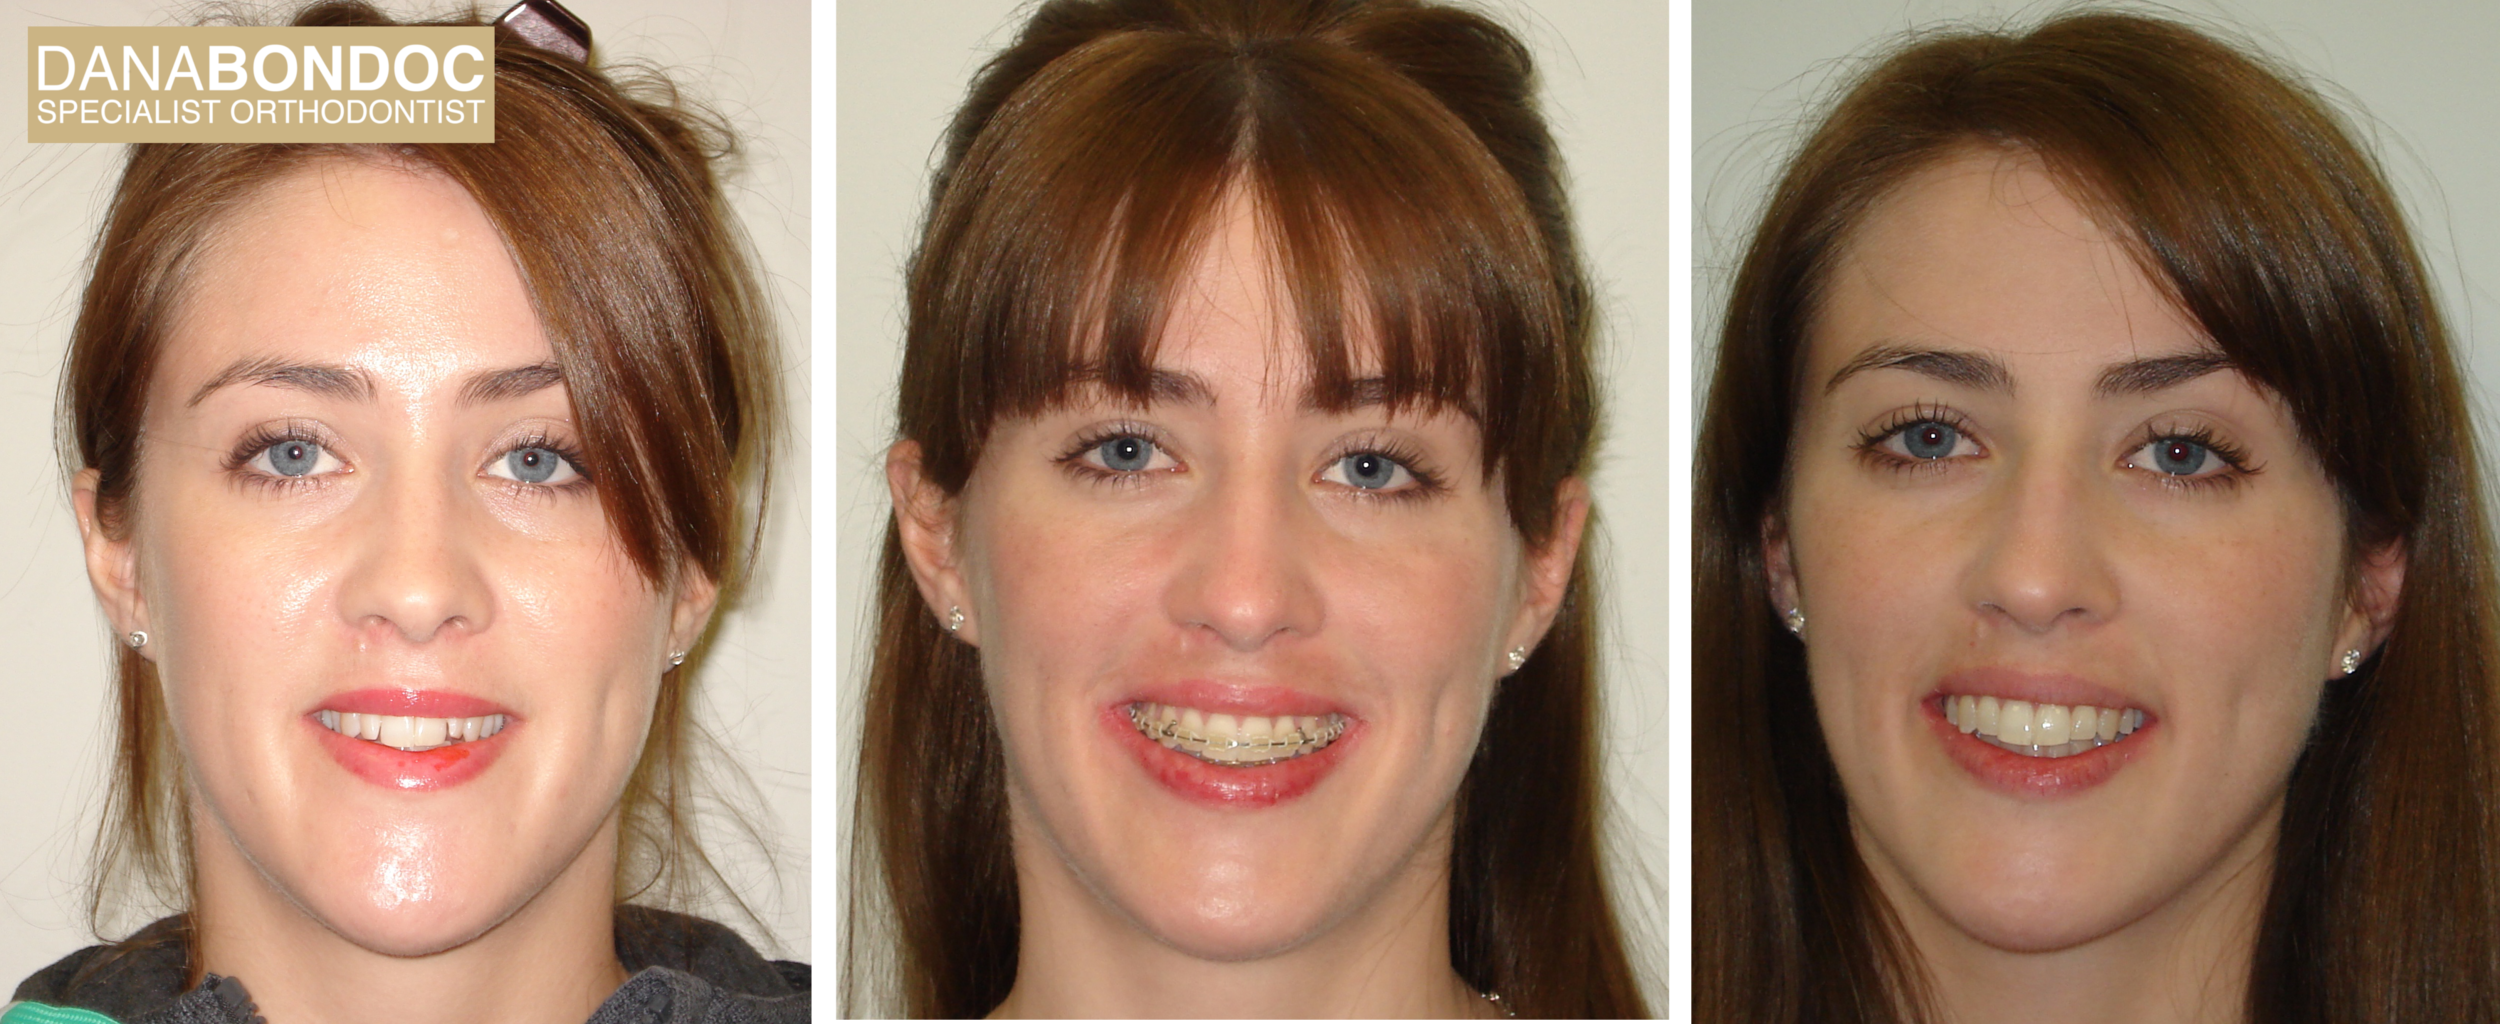 Before treatment, with clear braces on, after treatment photos of female adult patient plus a written testimonial. 